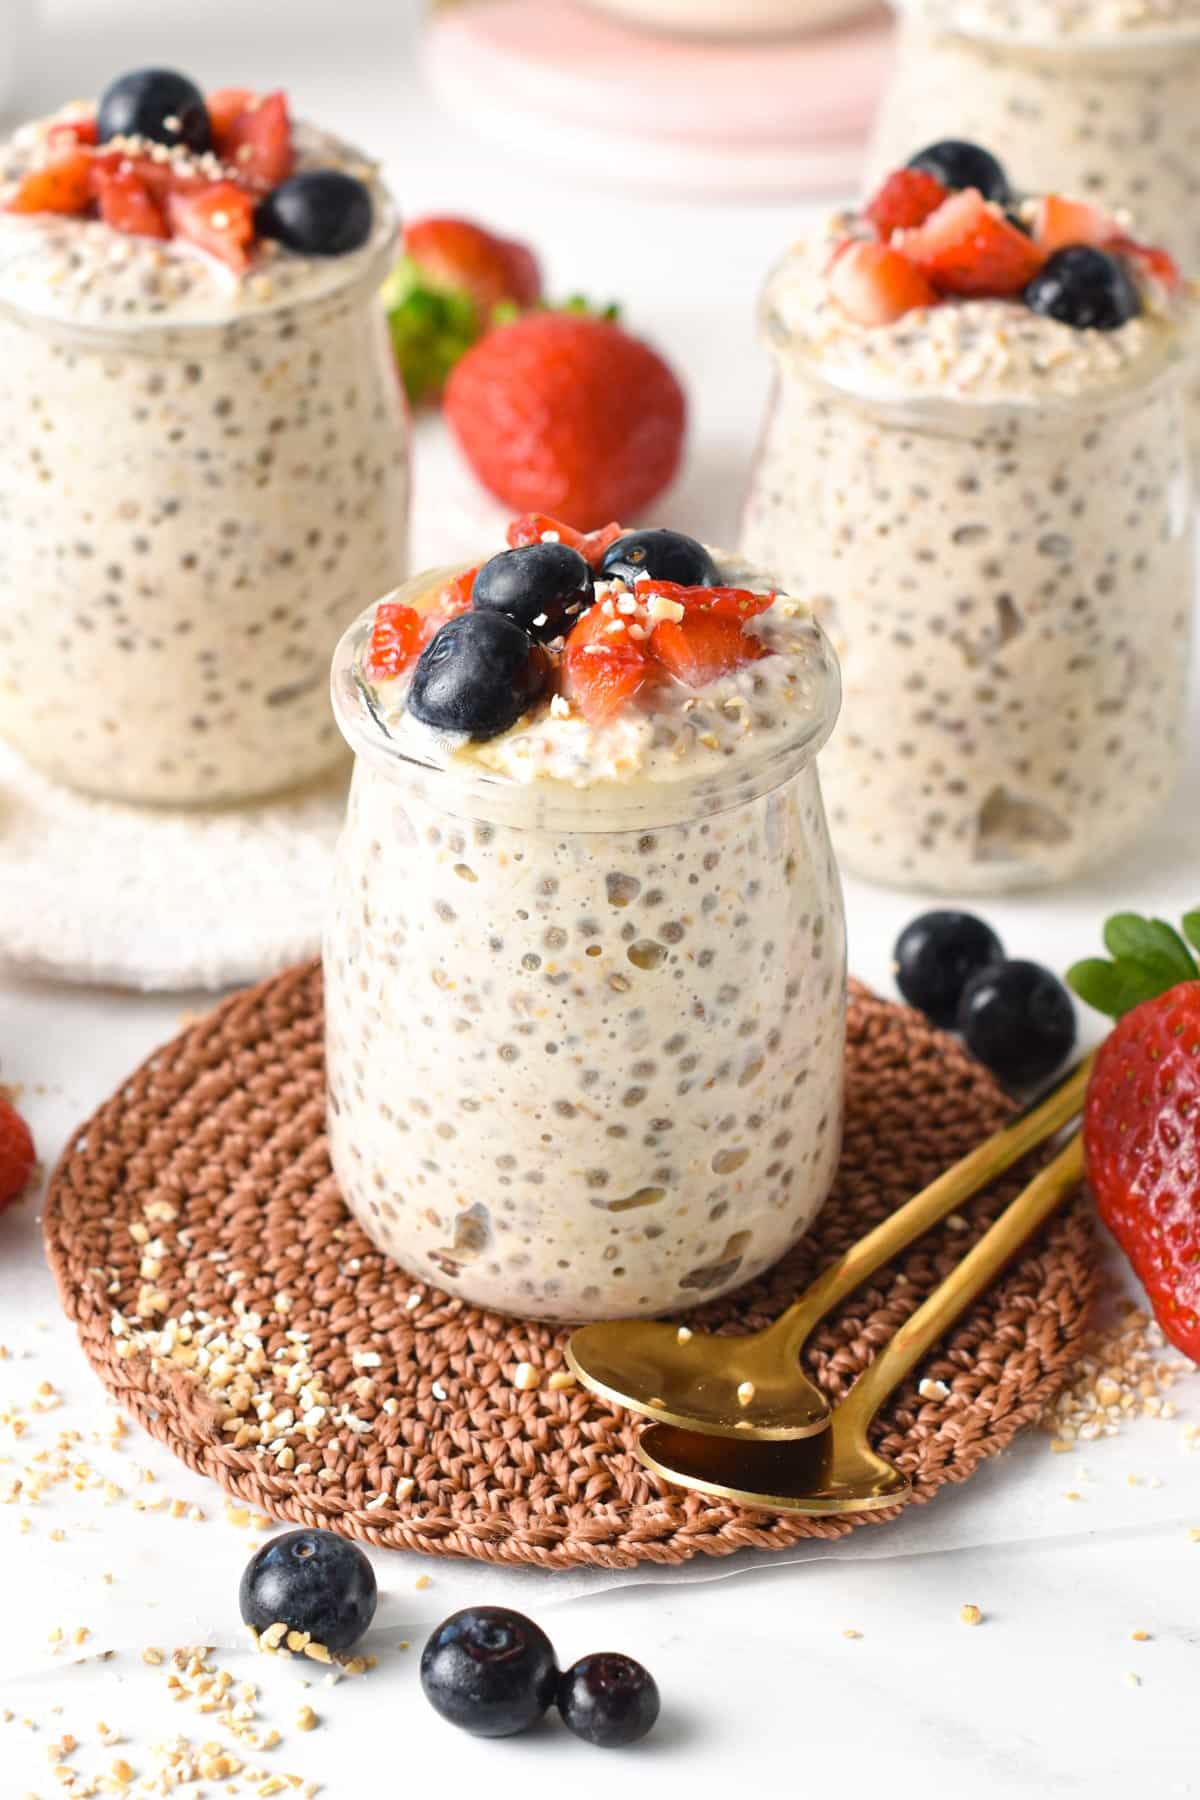 This Overnight Steel Cut Oats recipe is the most creamy overnight oats recipe, perfect to meal prep super healthy breakfasts.